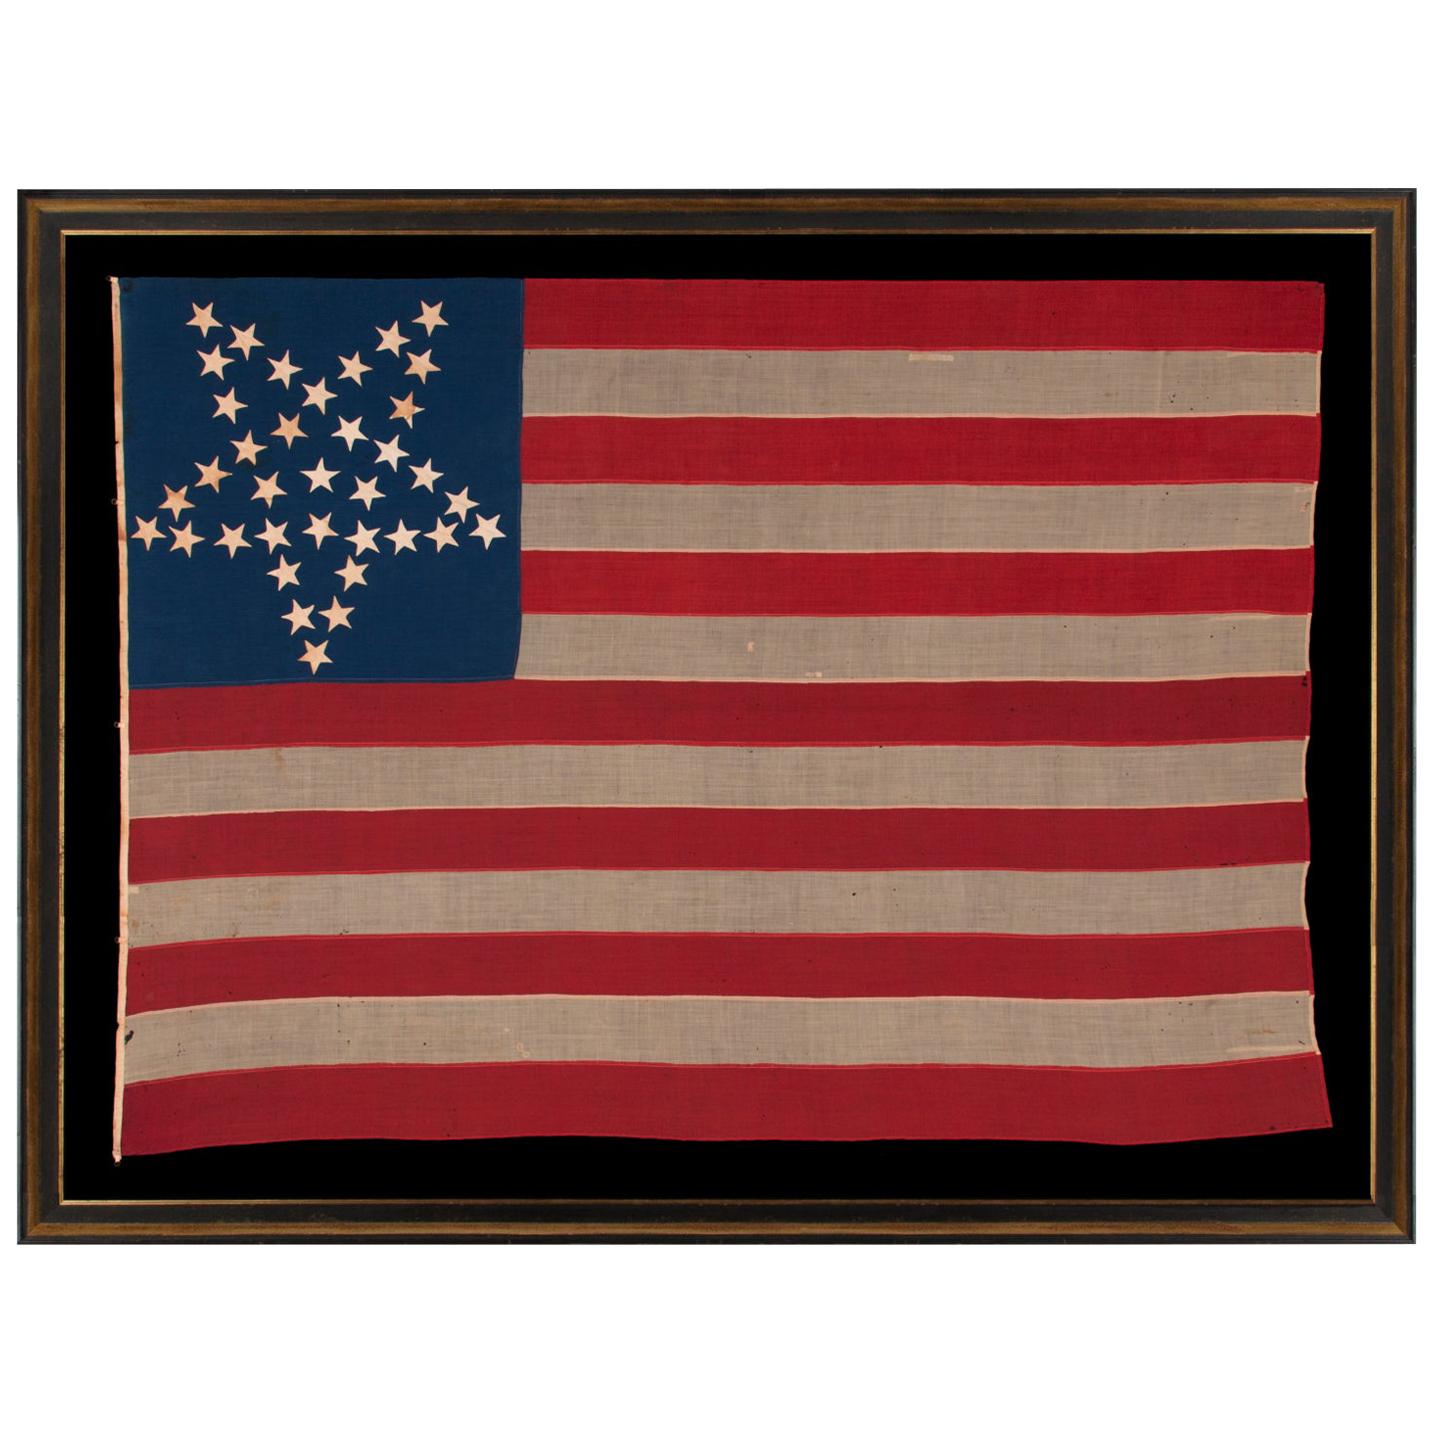 36 Star Antique Flag, Nevada Statehood, with Stars in the "Great Star" Pattern